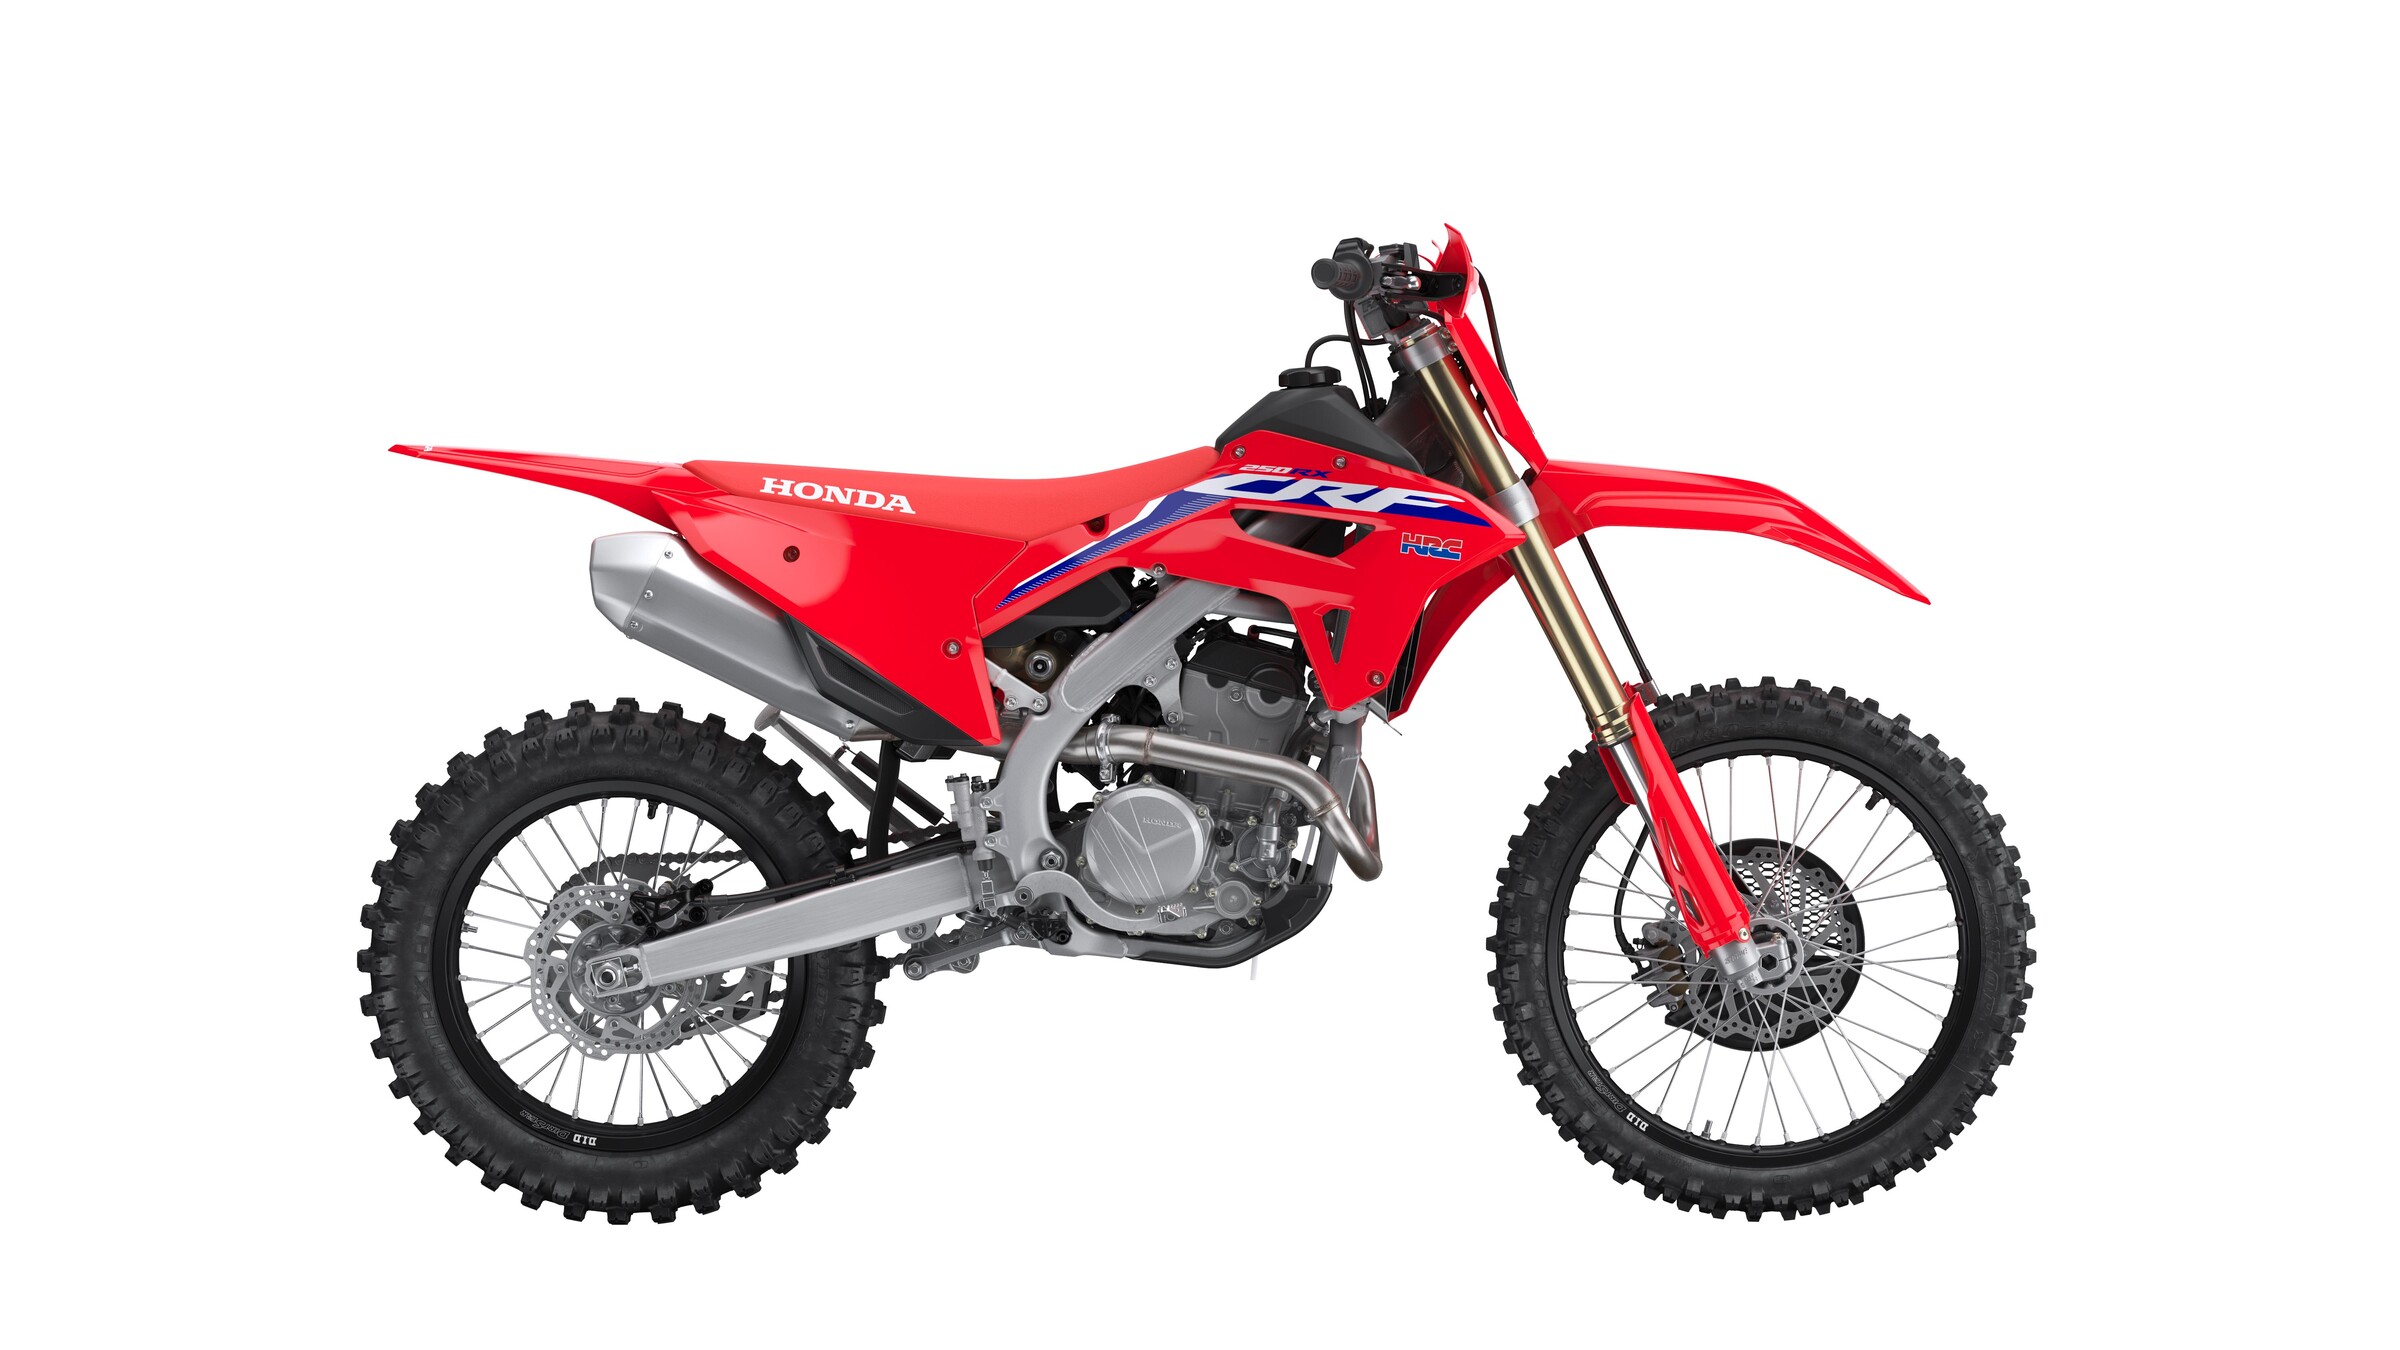 Details & Specifics of the All-New 2022 Honda CRF250R Model - Racer X